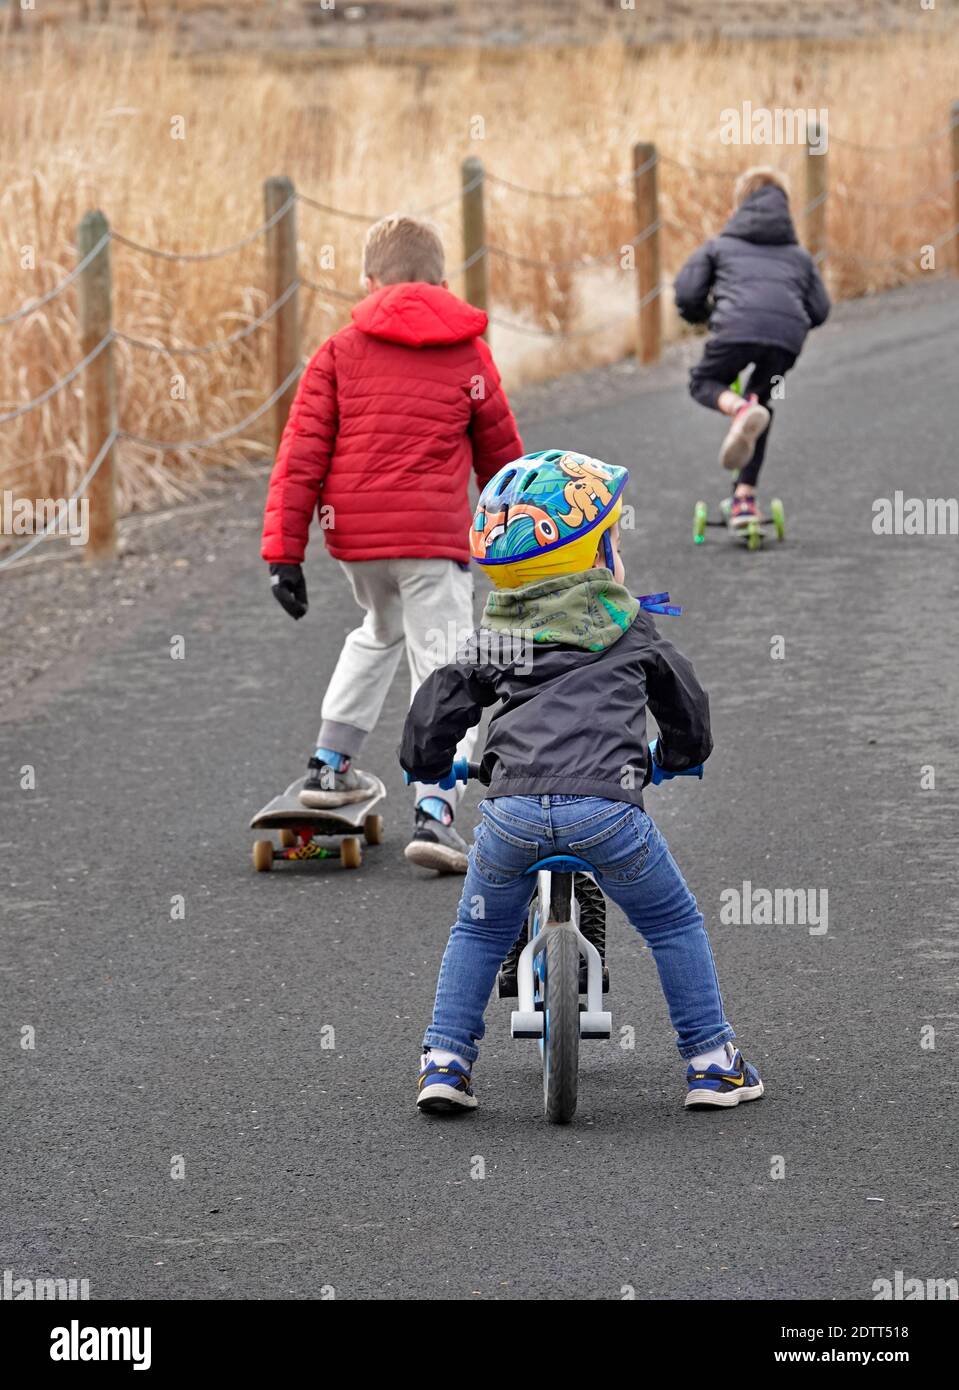 Young children ride and skate and rollerboard along a paved pathway in an rural setting in central Oregon. Stock Photo